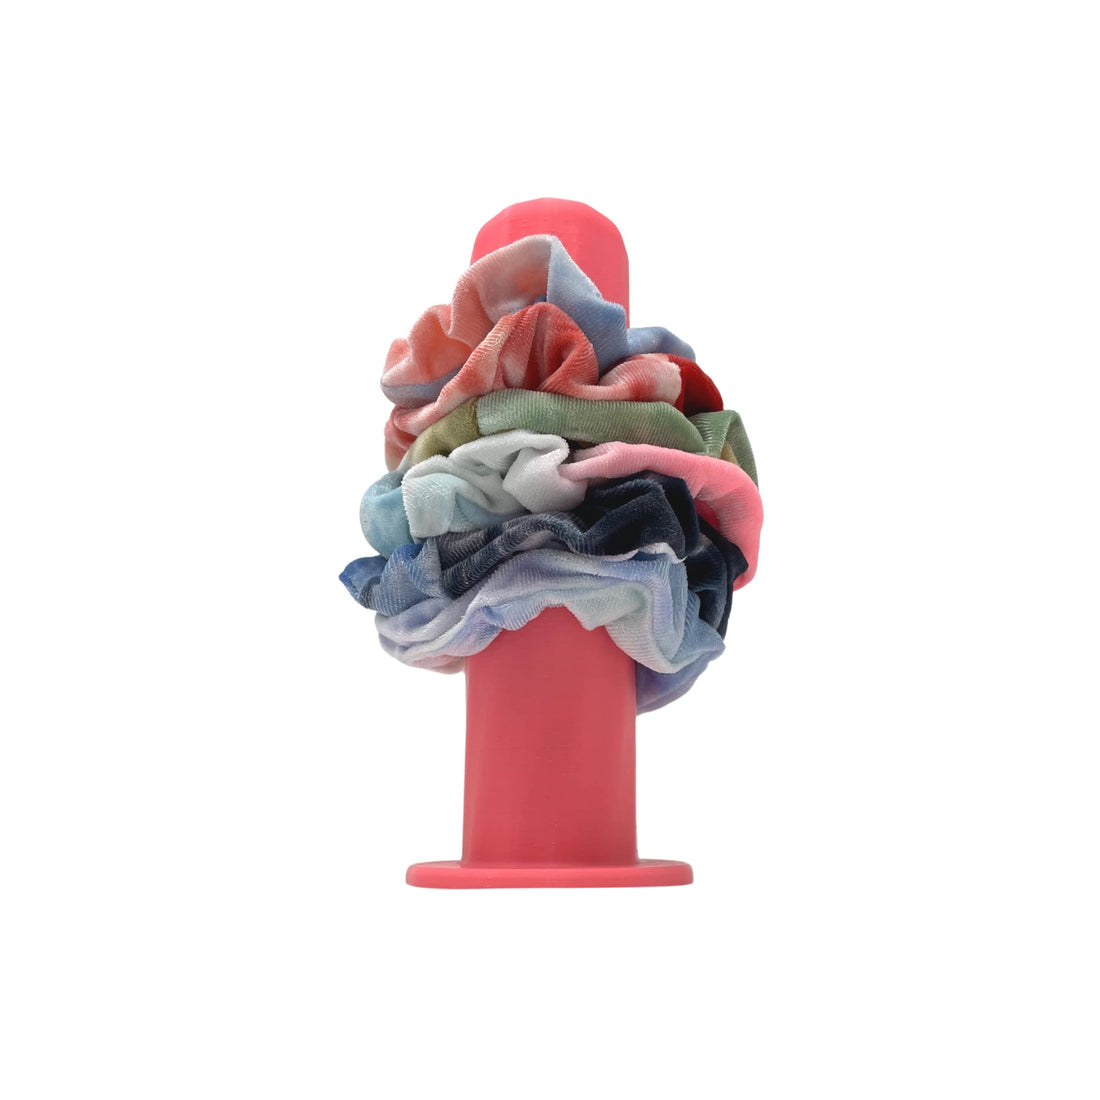 Scrunchie Tower Organizer - Perfect For Displaying & Organizing Scrunchies, Hair Ties, and Bracelets